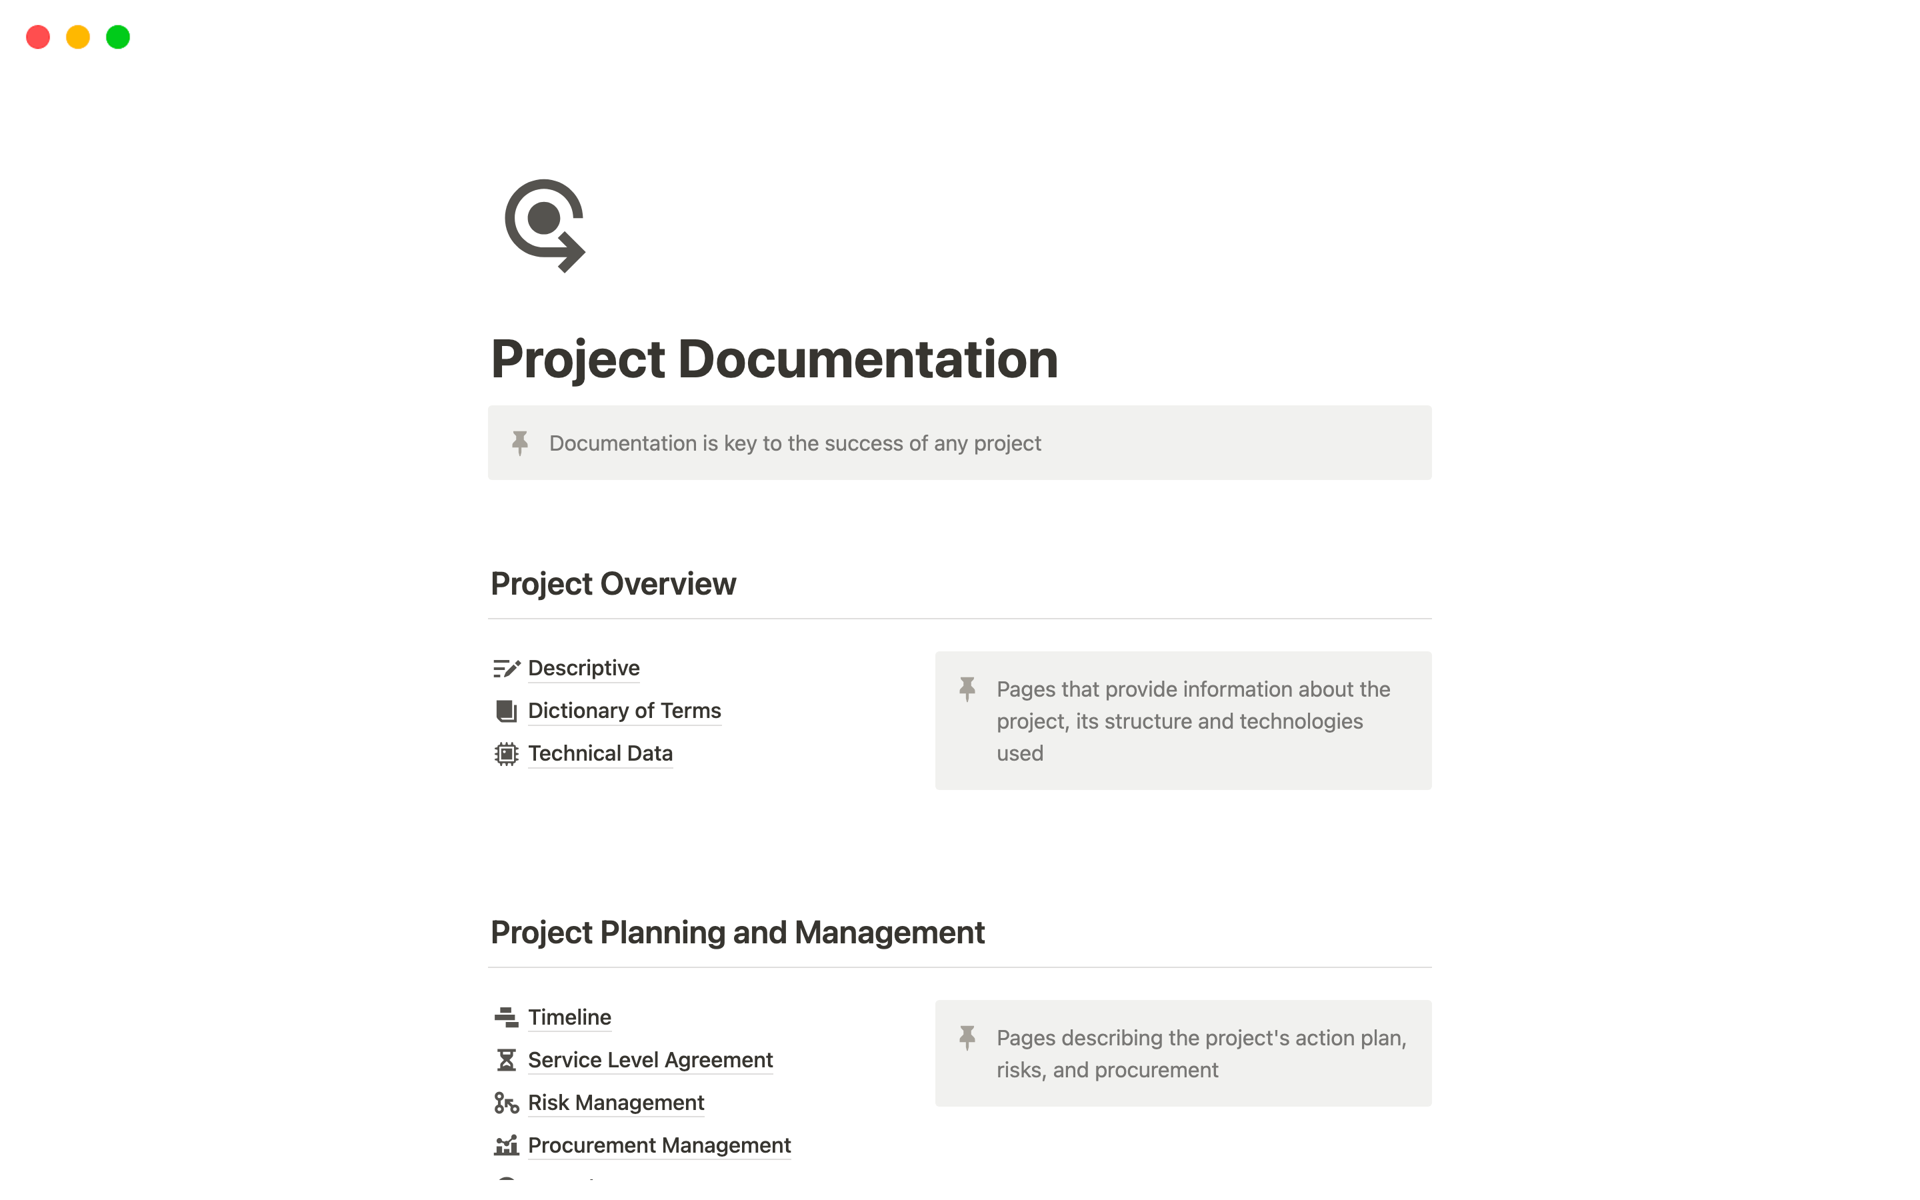 Everything you need to manage your projects efficiently and effectively